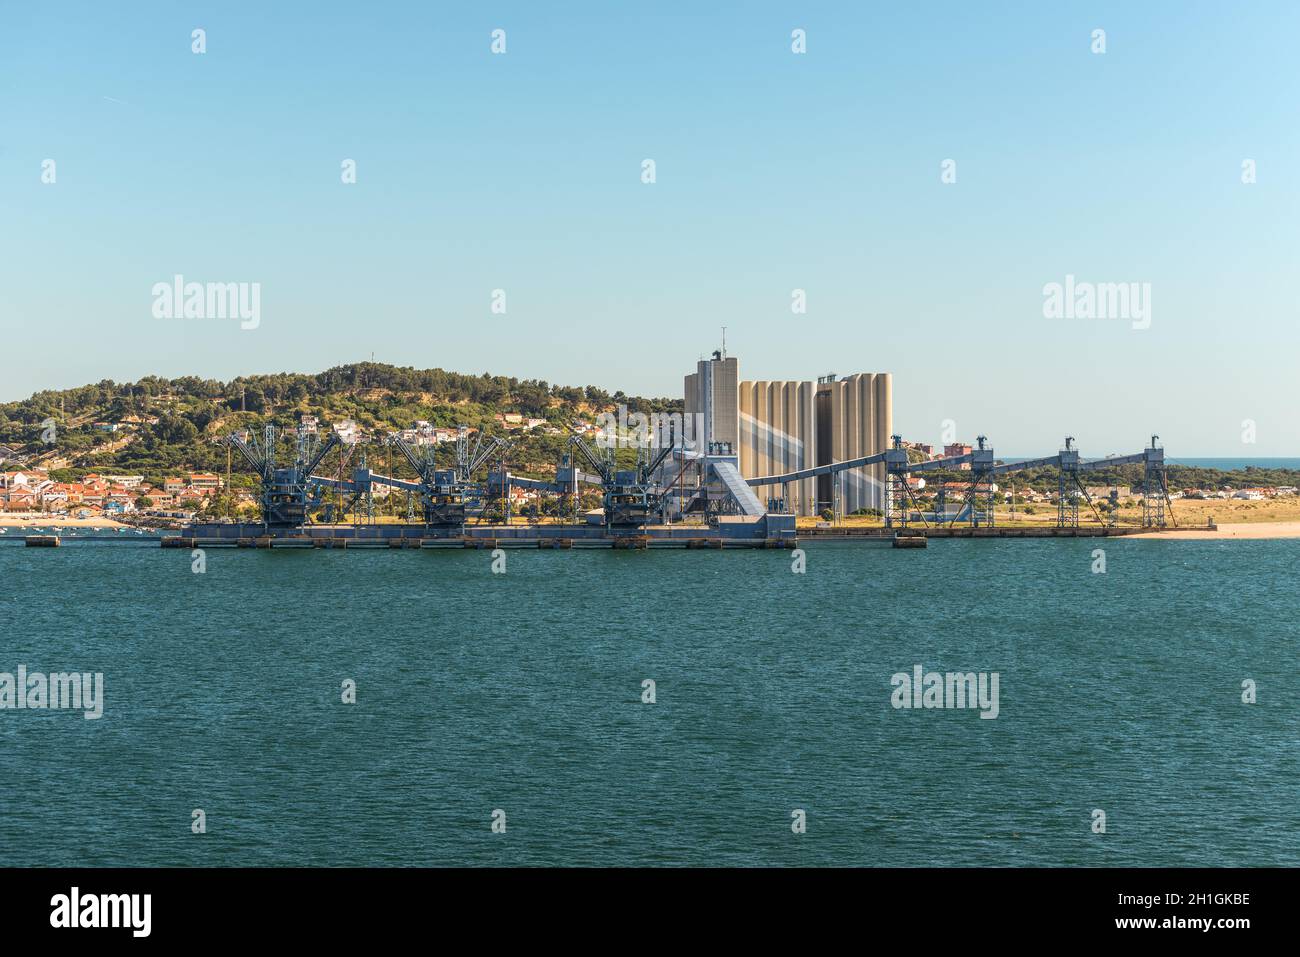 Lisbon, Portugal - May 19, 2017: Deep water port for ships transporting grain with large silos, cranes in Trafaria Port, Almada, Lisbon, Portugal. Stock Photo